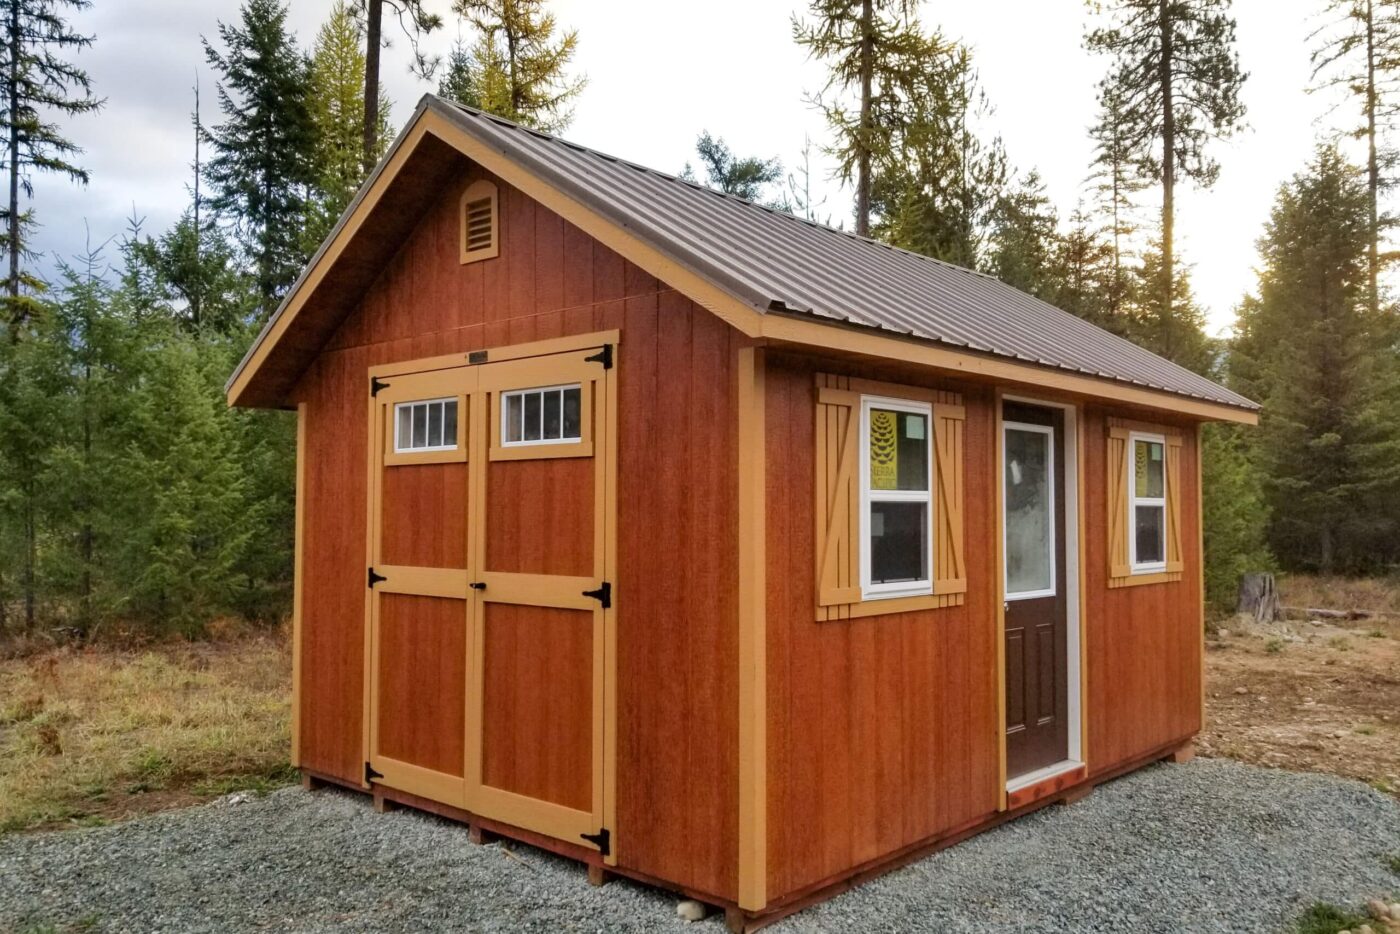 Red 10x12 shed in woods